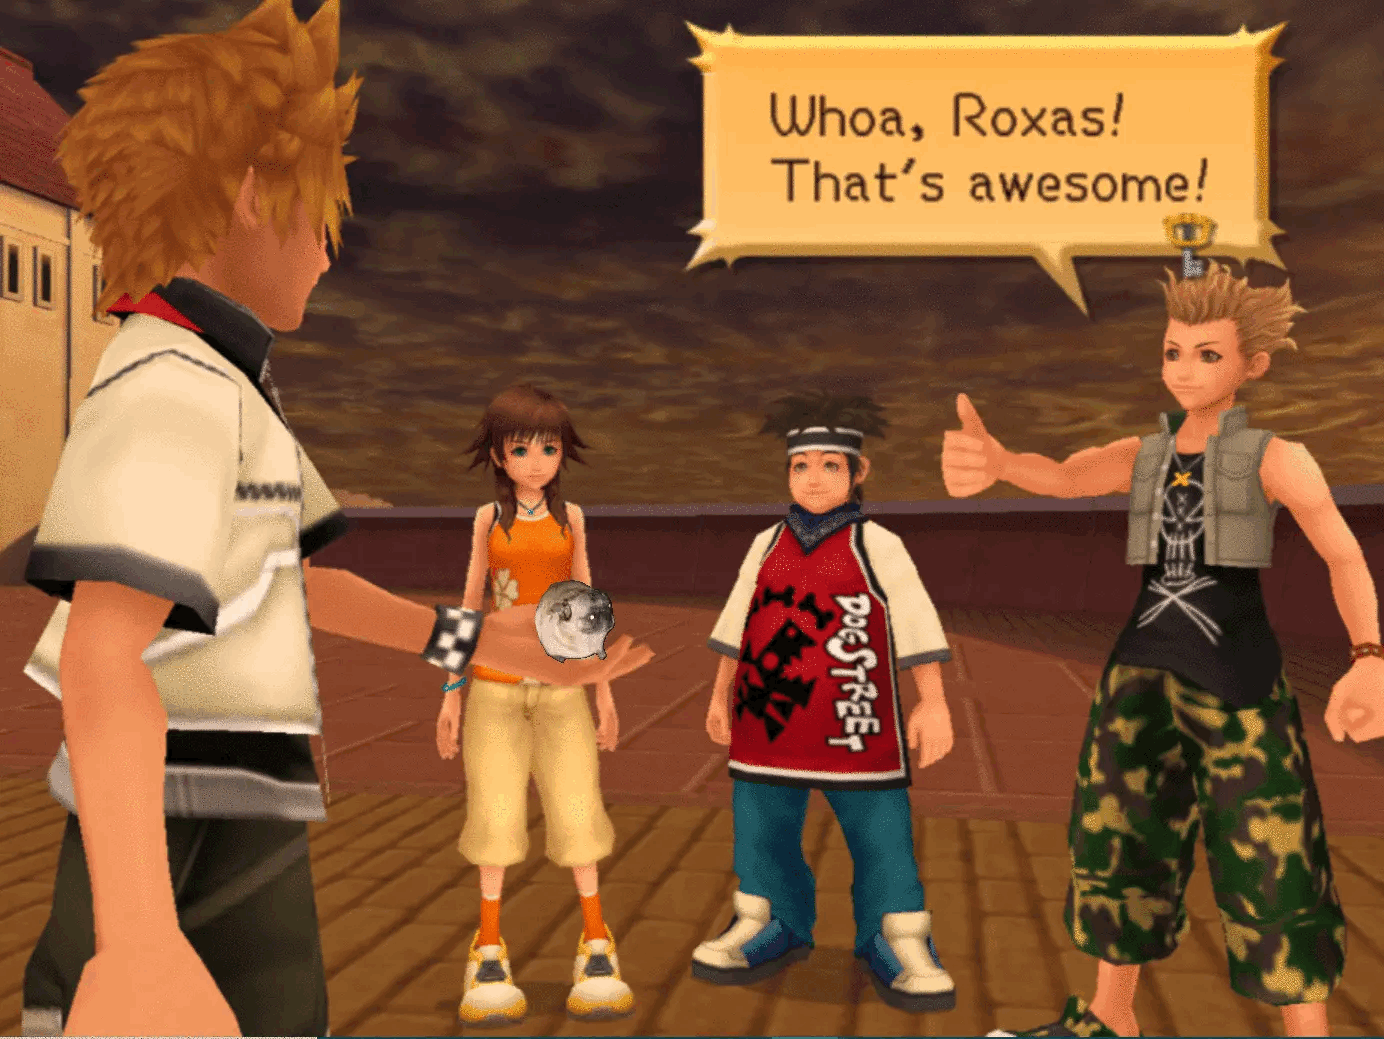 A gif of Roxas from Kingdom Hearts 2 standing with his friends. In his outstretched palm is a small pug dancing erratically. One of Roxas's friends says, 'Woah, Roxas! That's awesome!' and gives him a thumbs up.